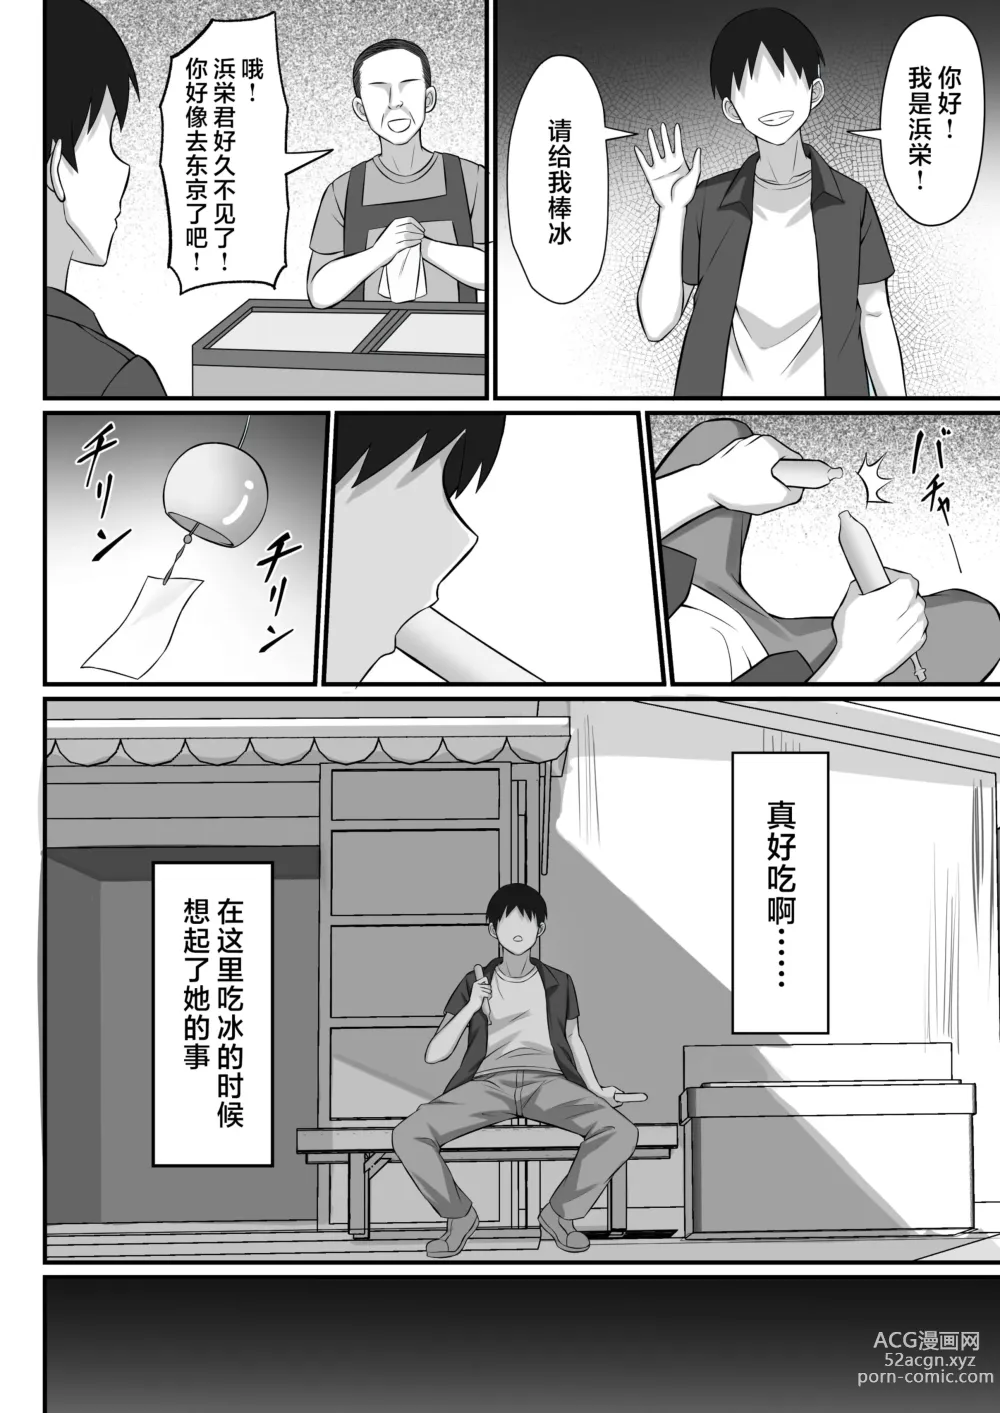 Page 7 of doujinshi 我的上京性生活12 